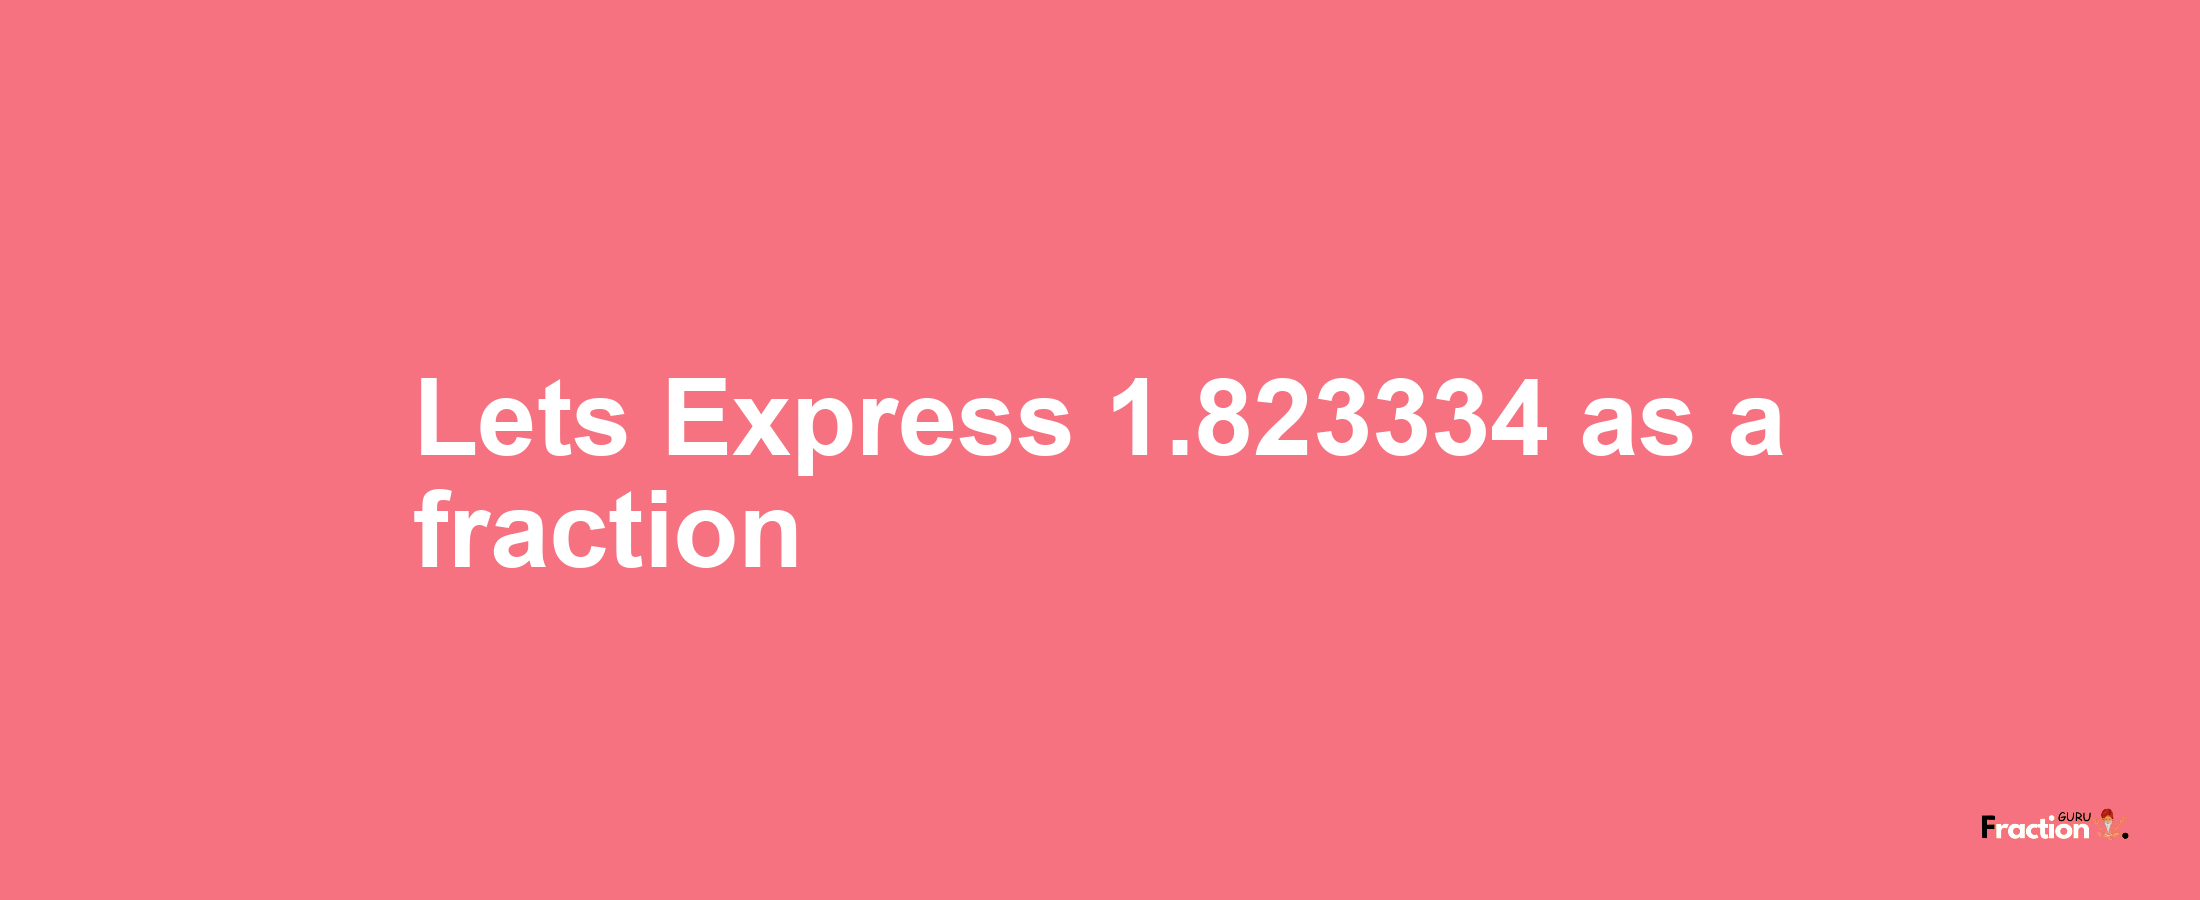 Lets Express 1.823334 as afraction